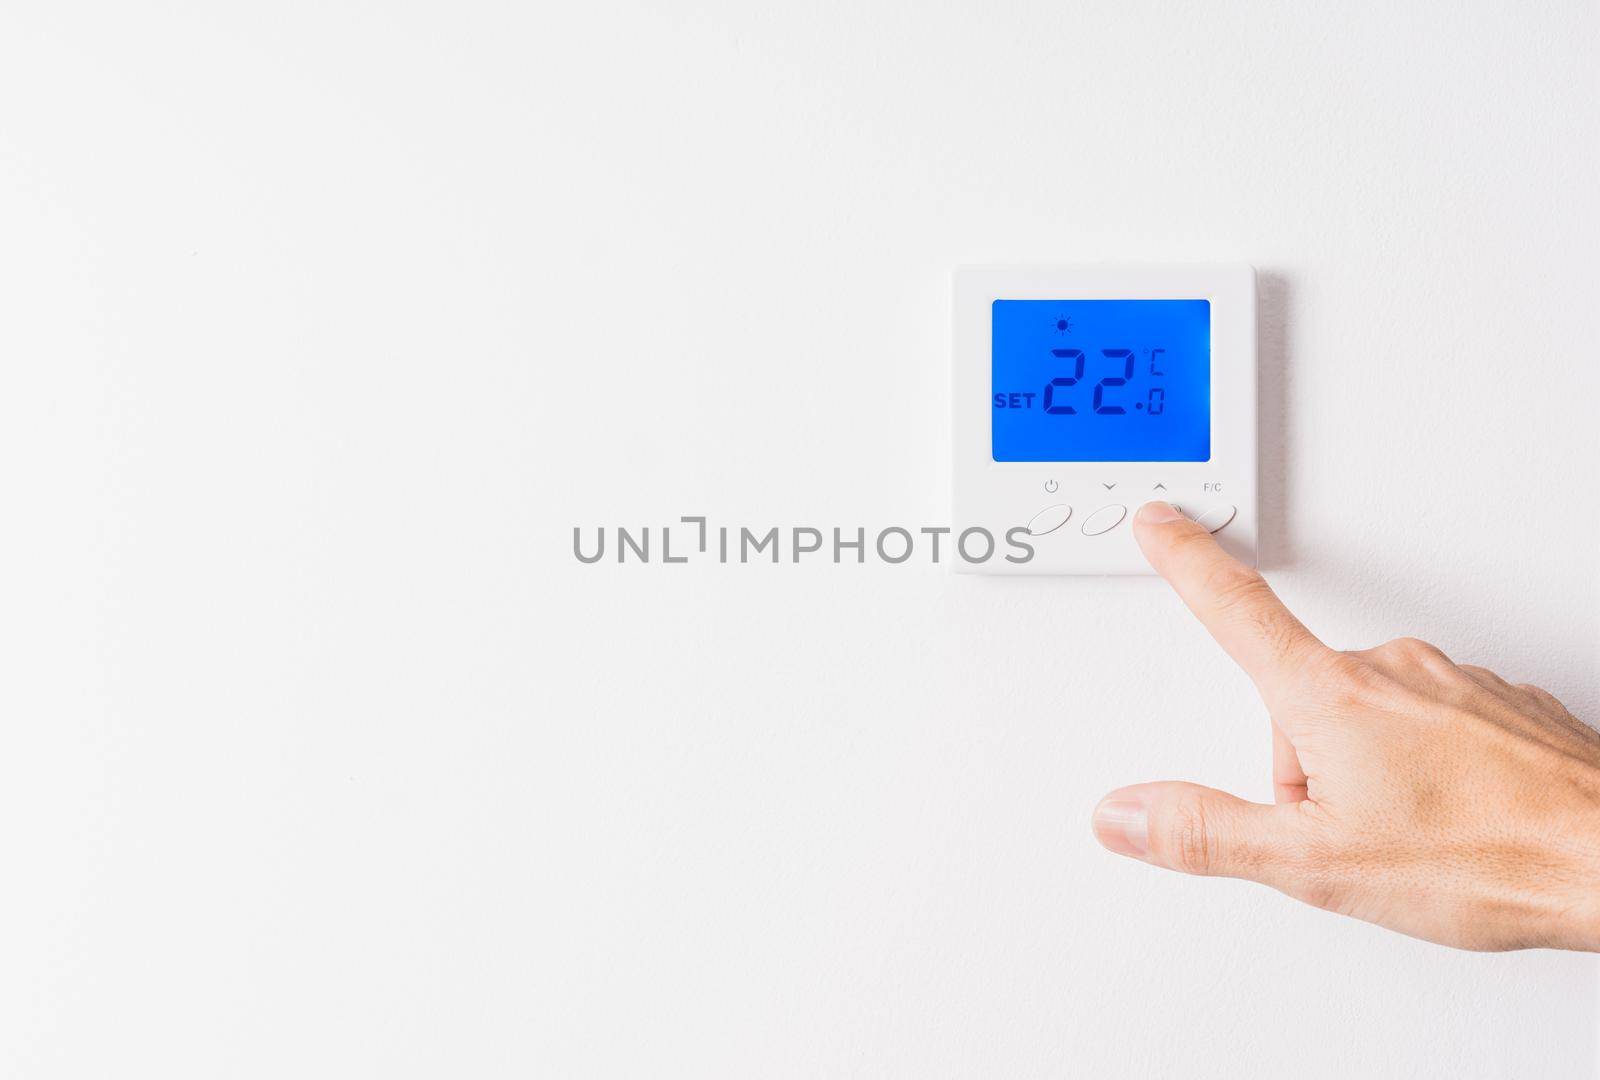 Caucasian man's hand adjusting the temperature of a white thermostat to twenty-two degrees with the blue backlit display on a white wall